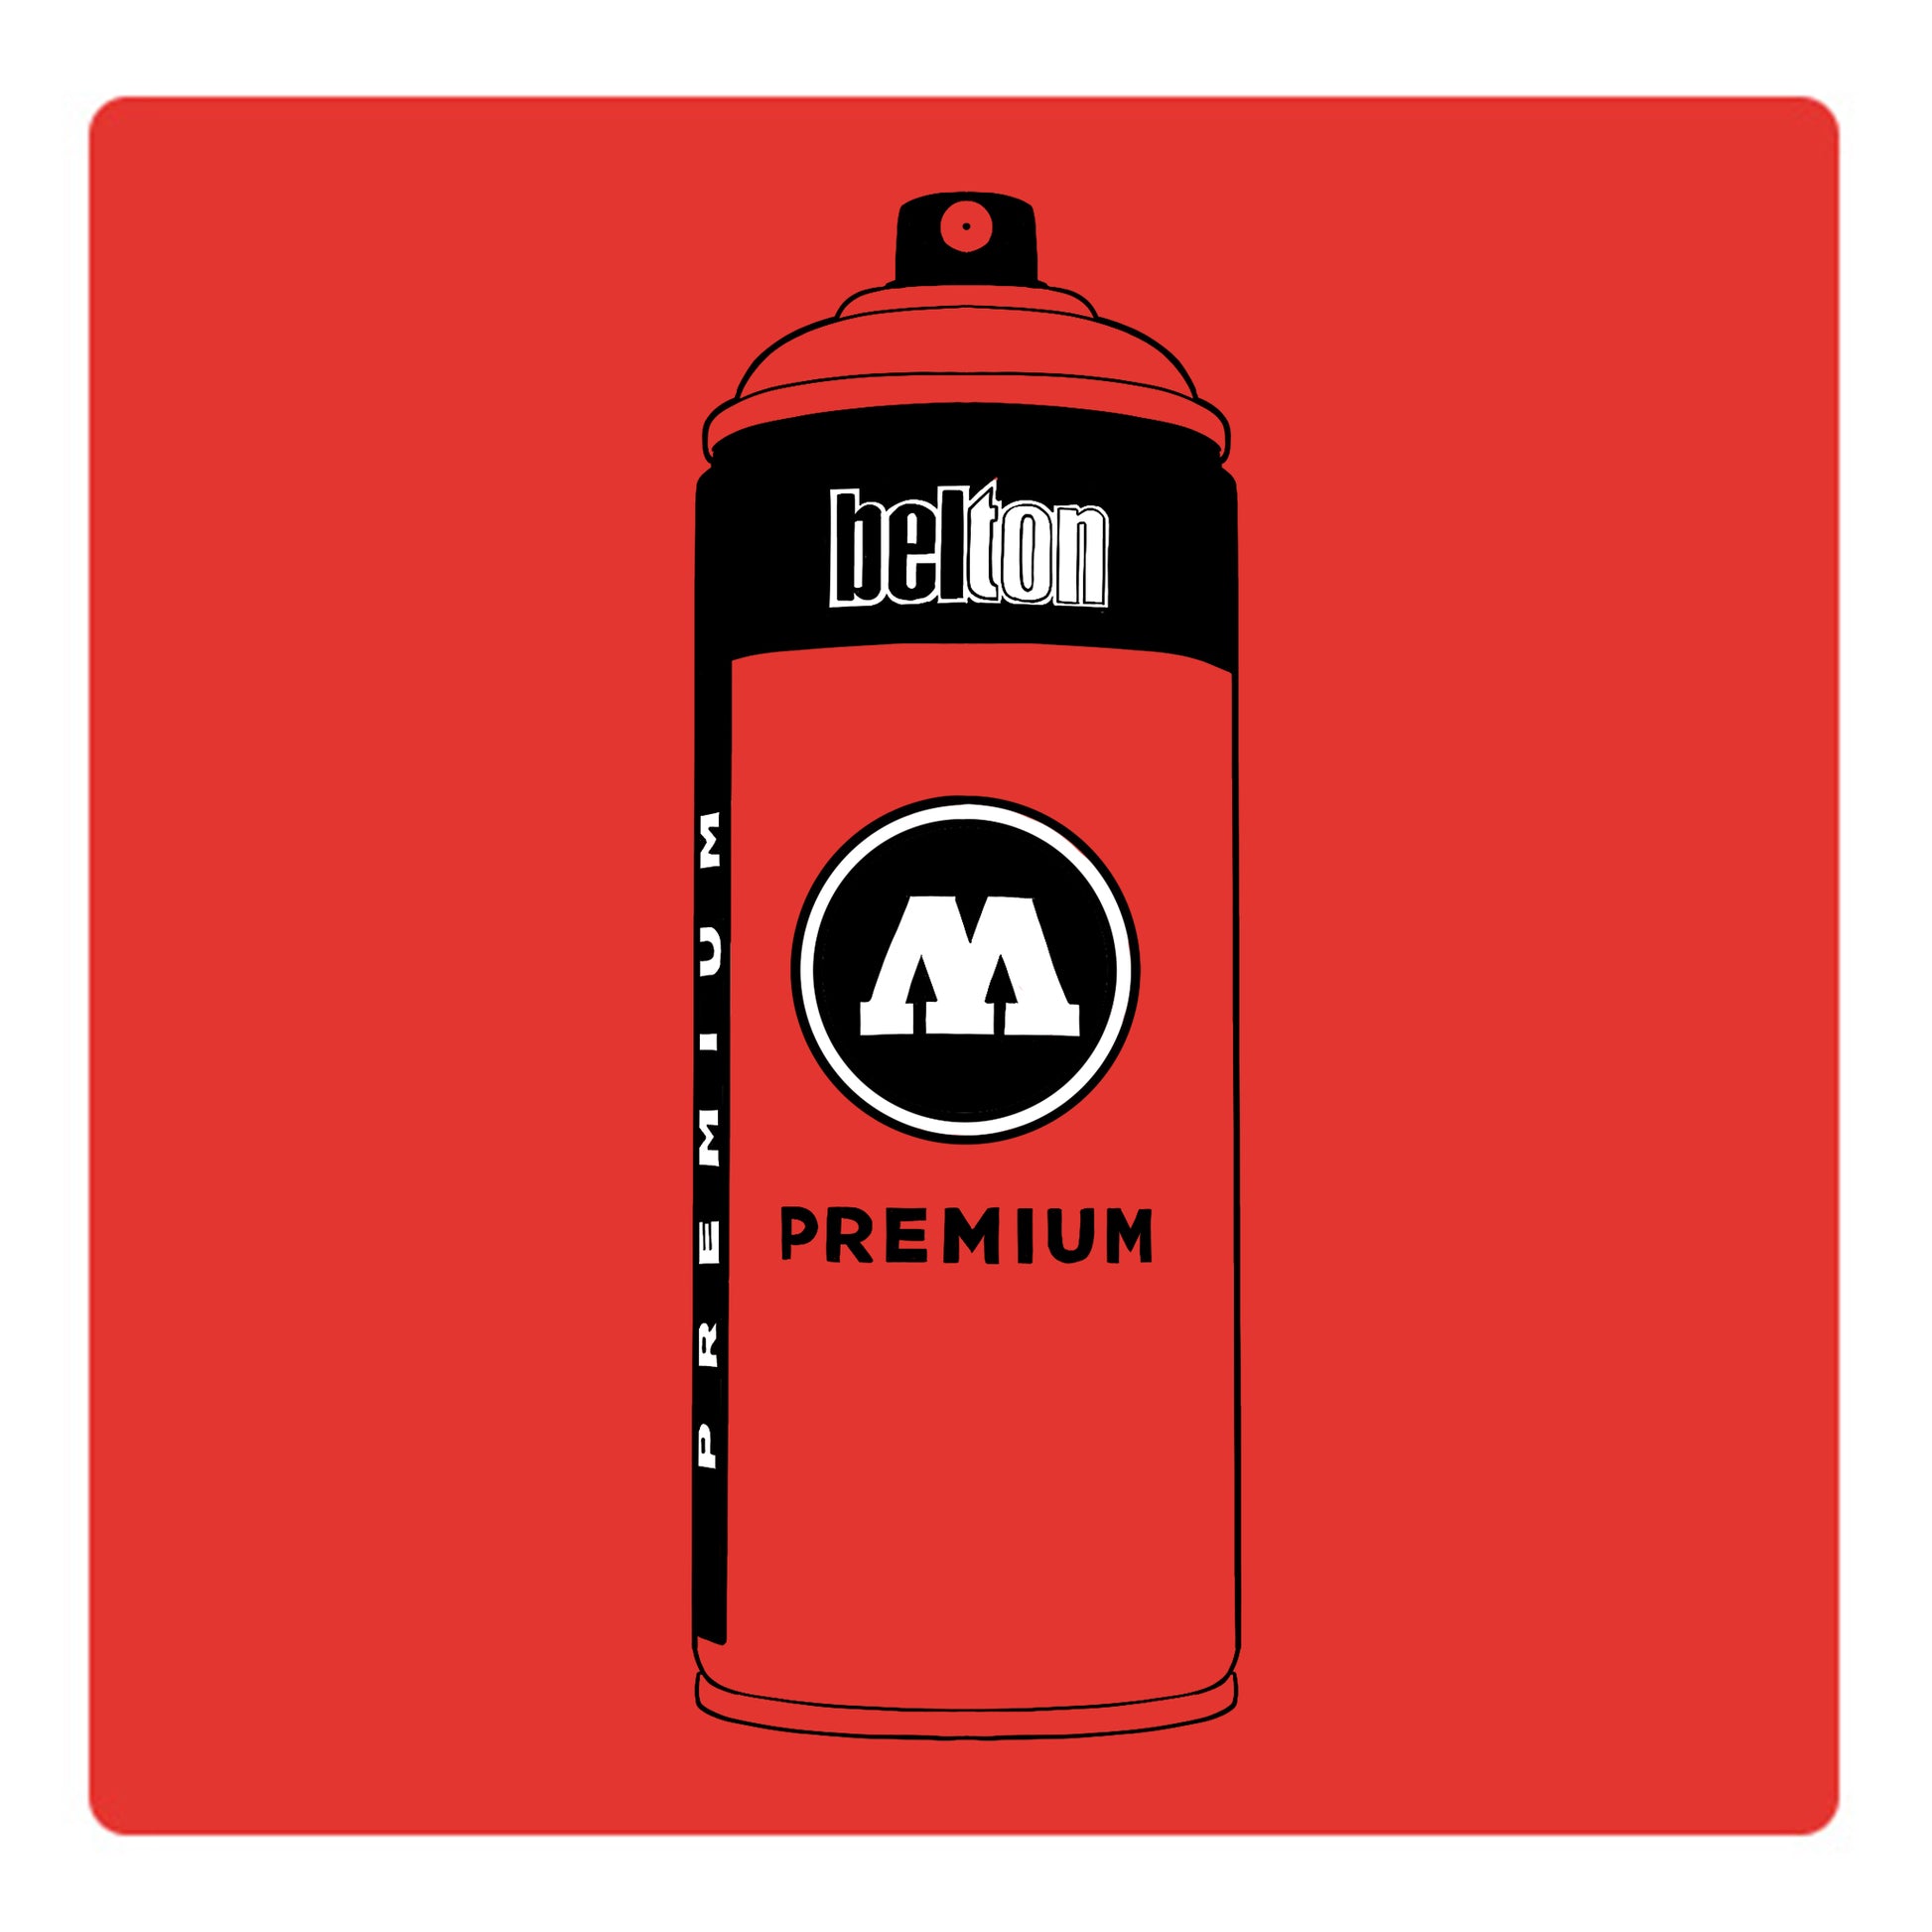 A black outline drawing of a neon orange spray paint can with the words "belton","premium" and the letter"M" written on the face in black and white font. The background is a color swatch of the same neon orange with a white border.